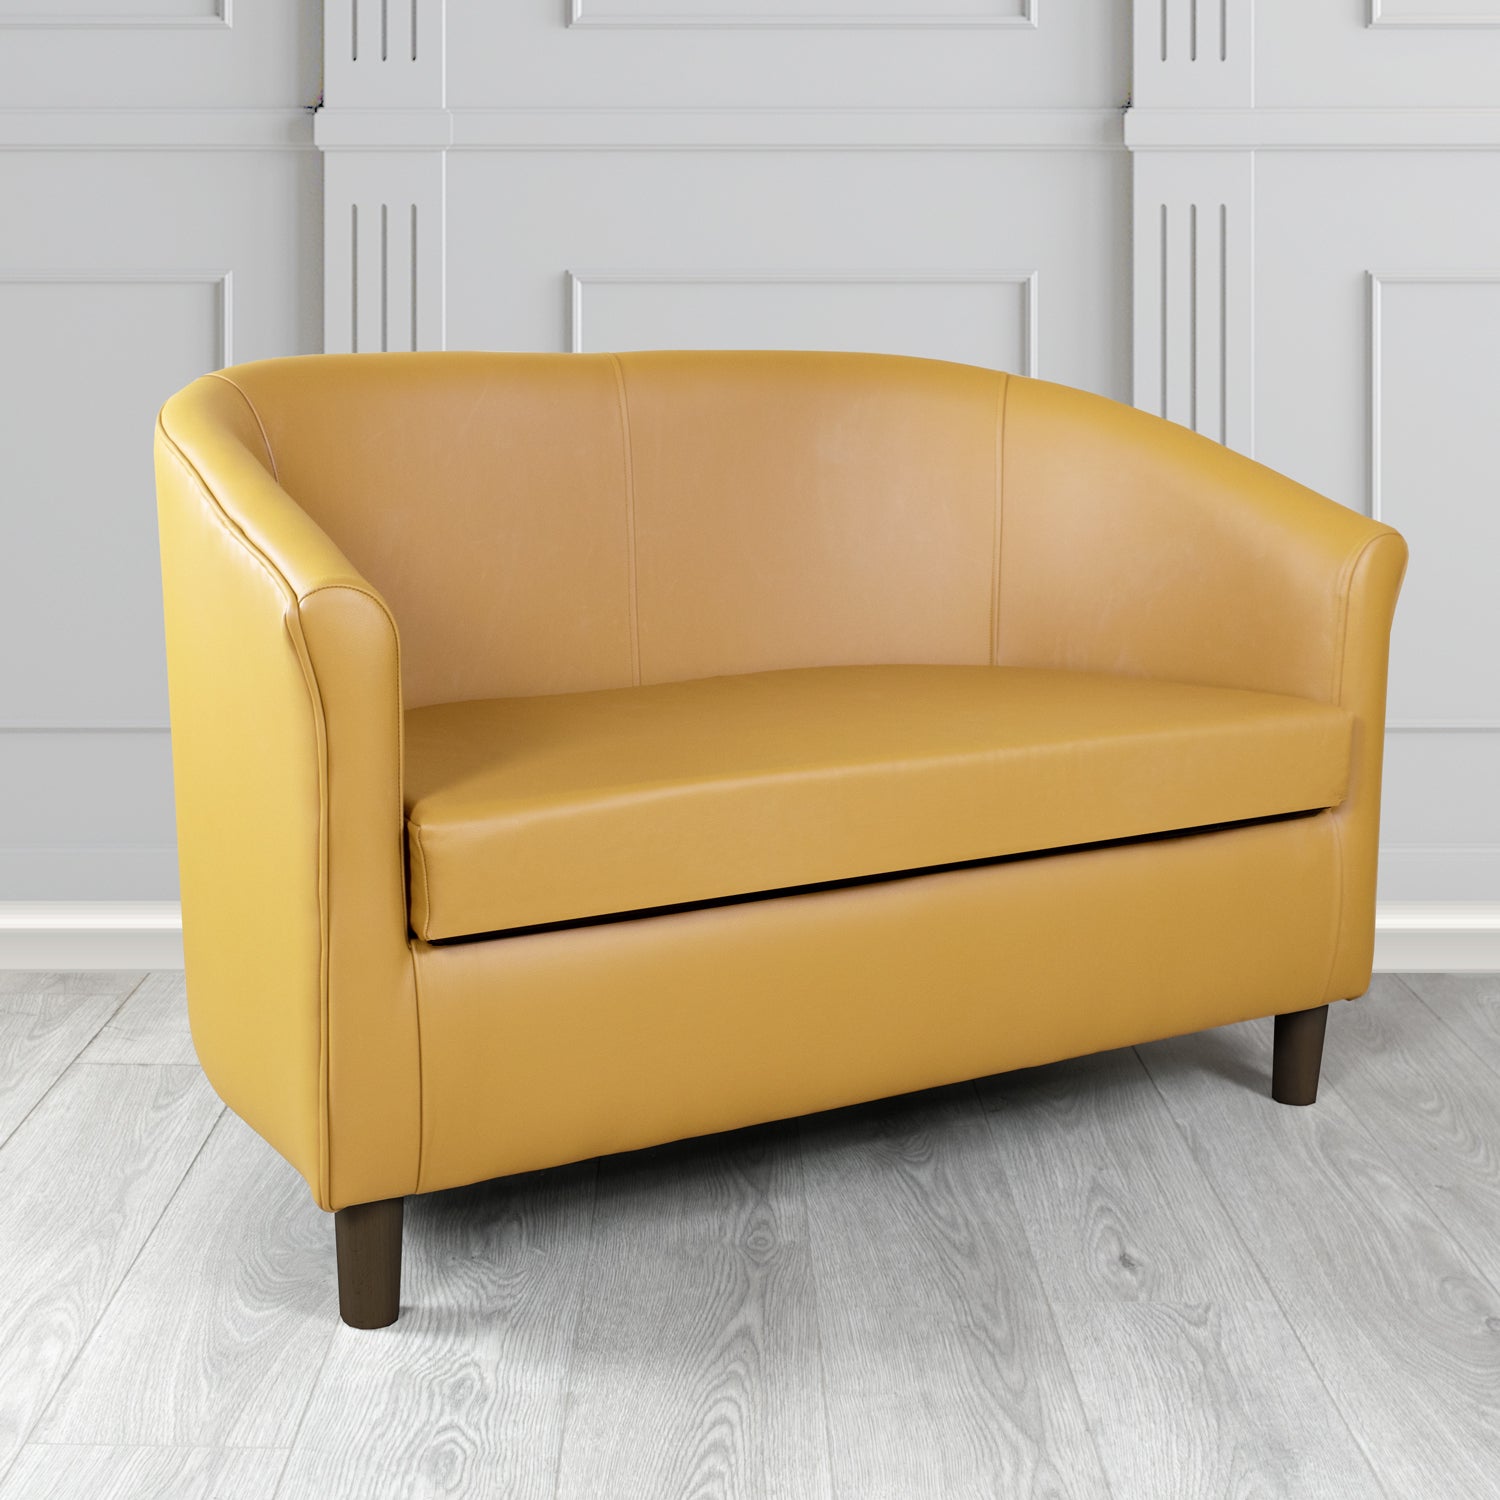 Tuscany Shelly Parchment Crib 5 Genuine Leather 2 Seater Tub Sofa - The Tub Chair Shop